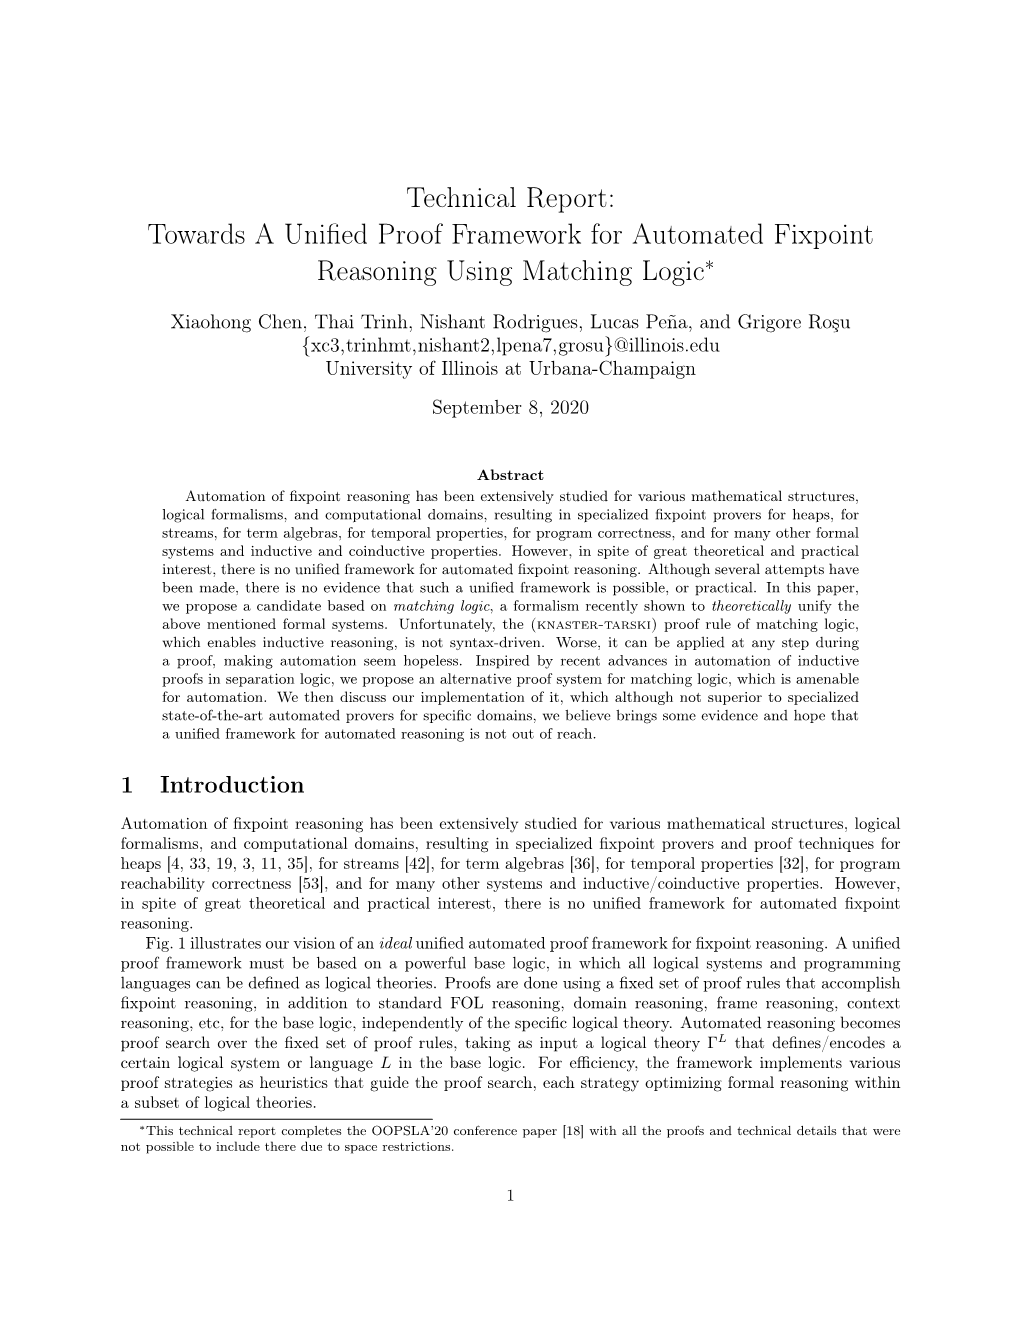 Towards a Unified Proof Framework for Automated Fixpoint Reasoning